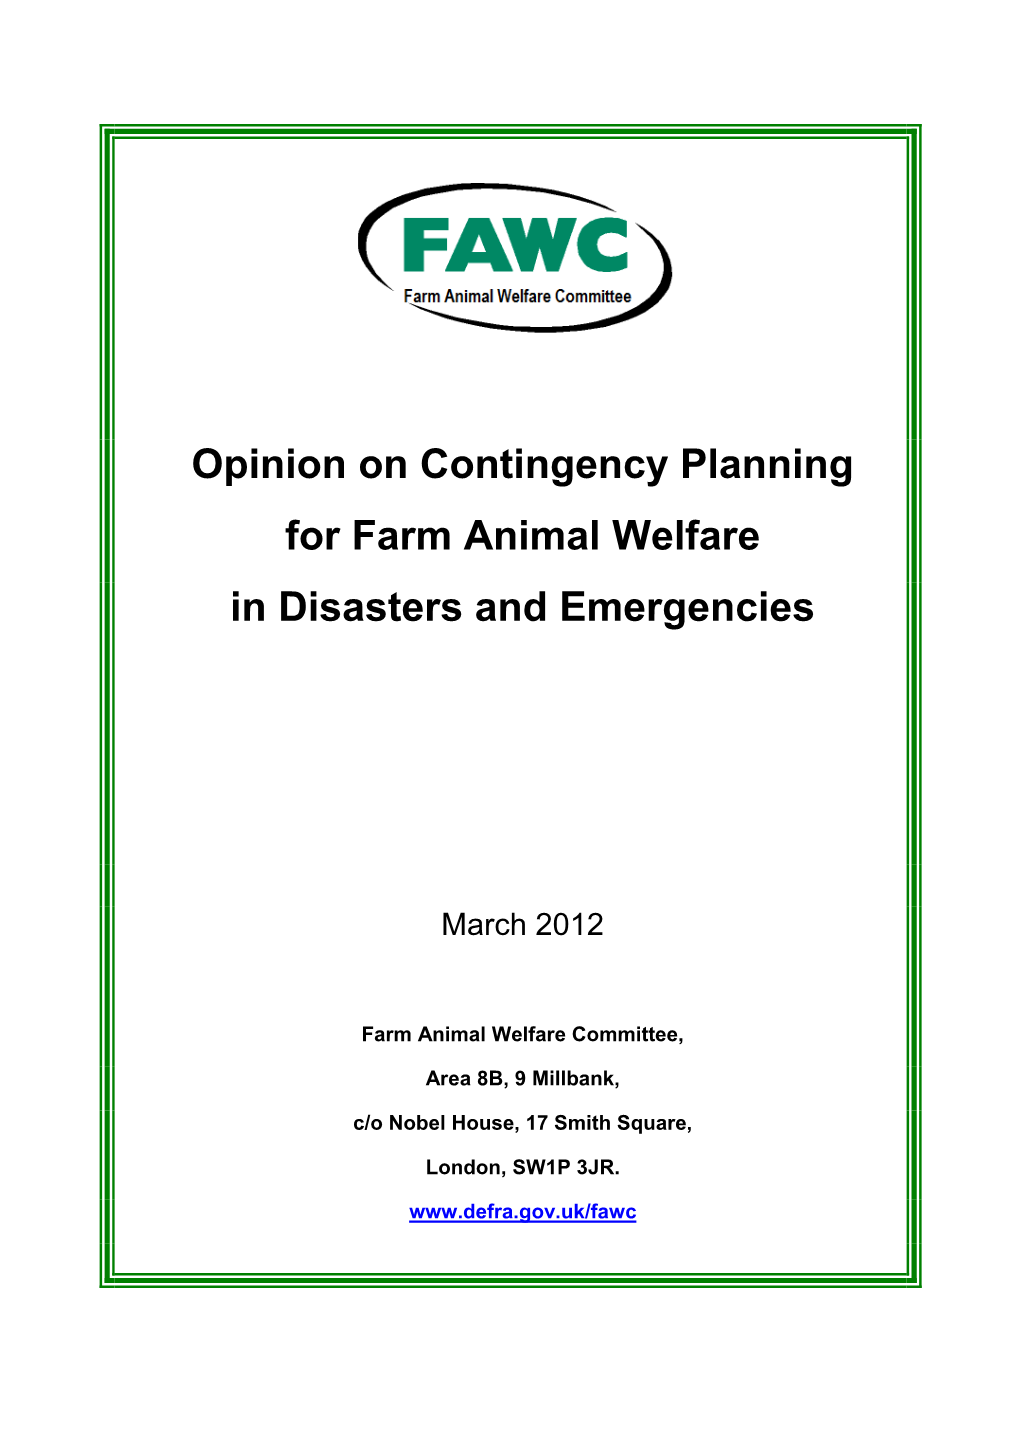 Opinion on Contingency Planning for Farm Animal Welfare in Disasters and Emergencies